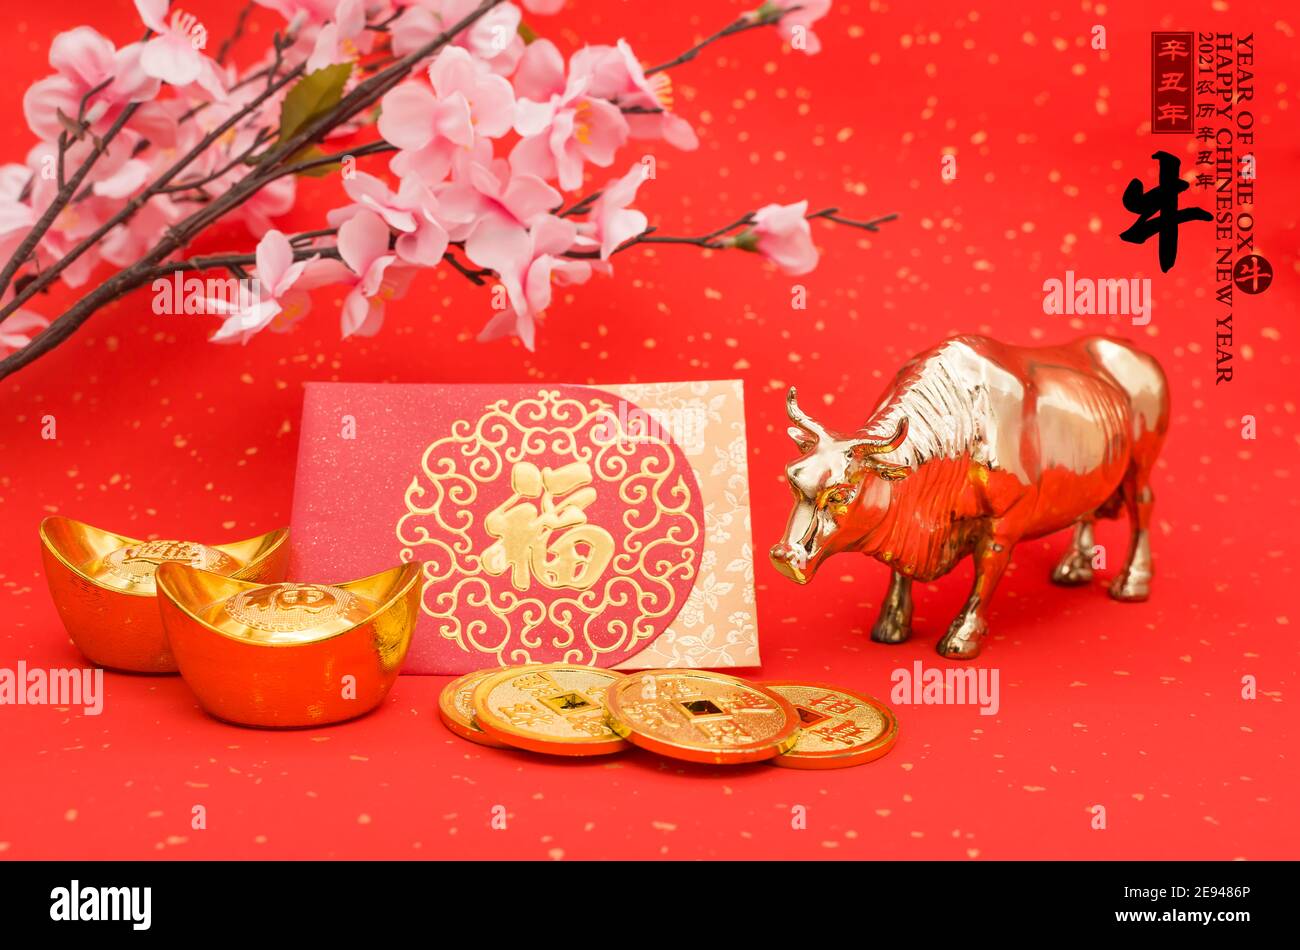 Tradition Chinese 2021 is year of the ox,Chinese characters on rightside mesn chinese wording and seal mean:Chinese calendar for the year.leftside and Stock Photo